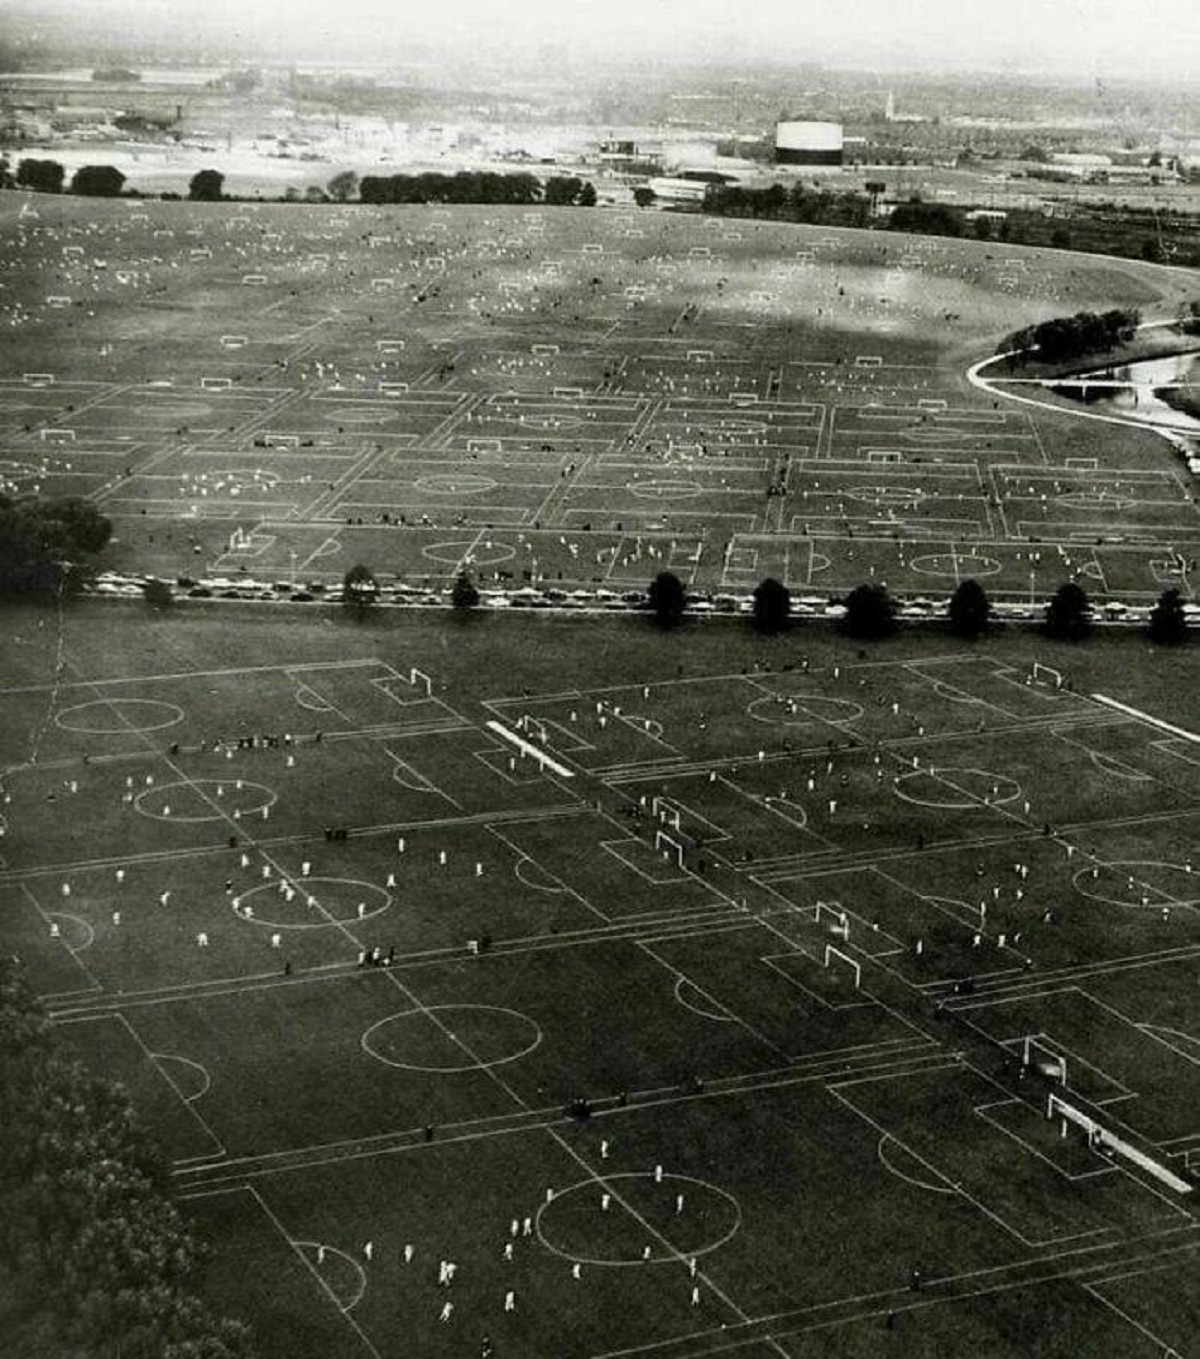 "111 Football Games Played At Hackney Marshes, London, United Kingdom In 1962"